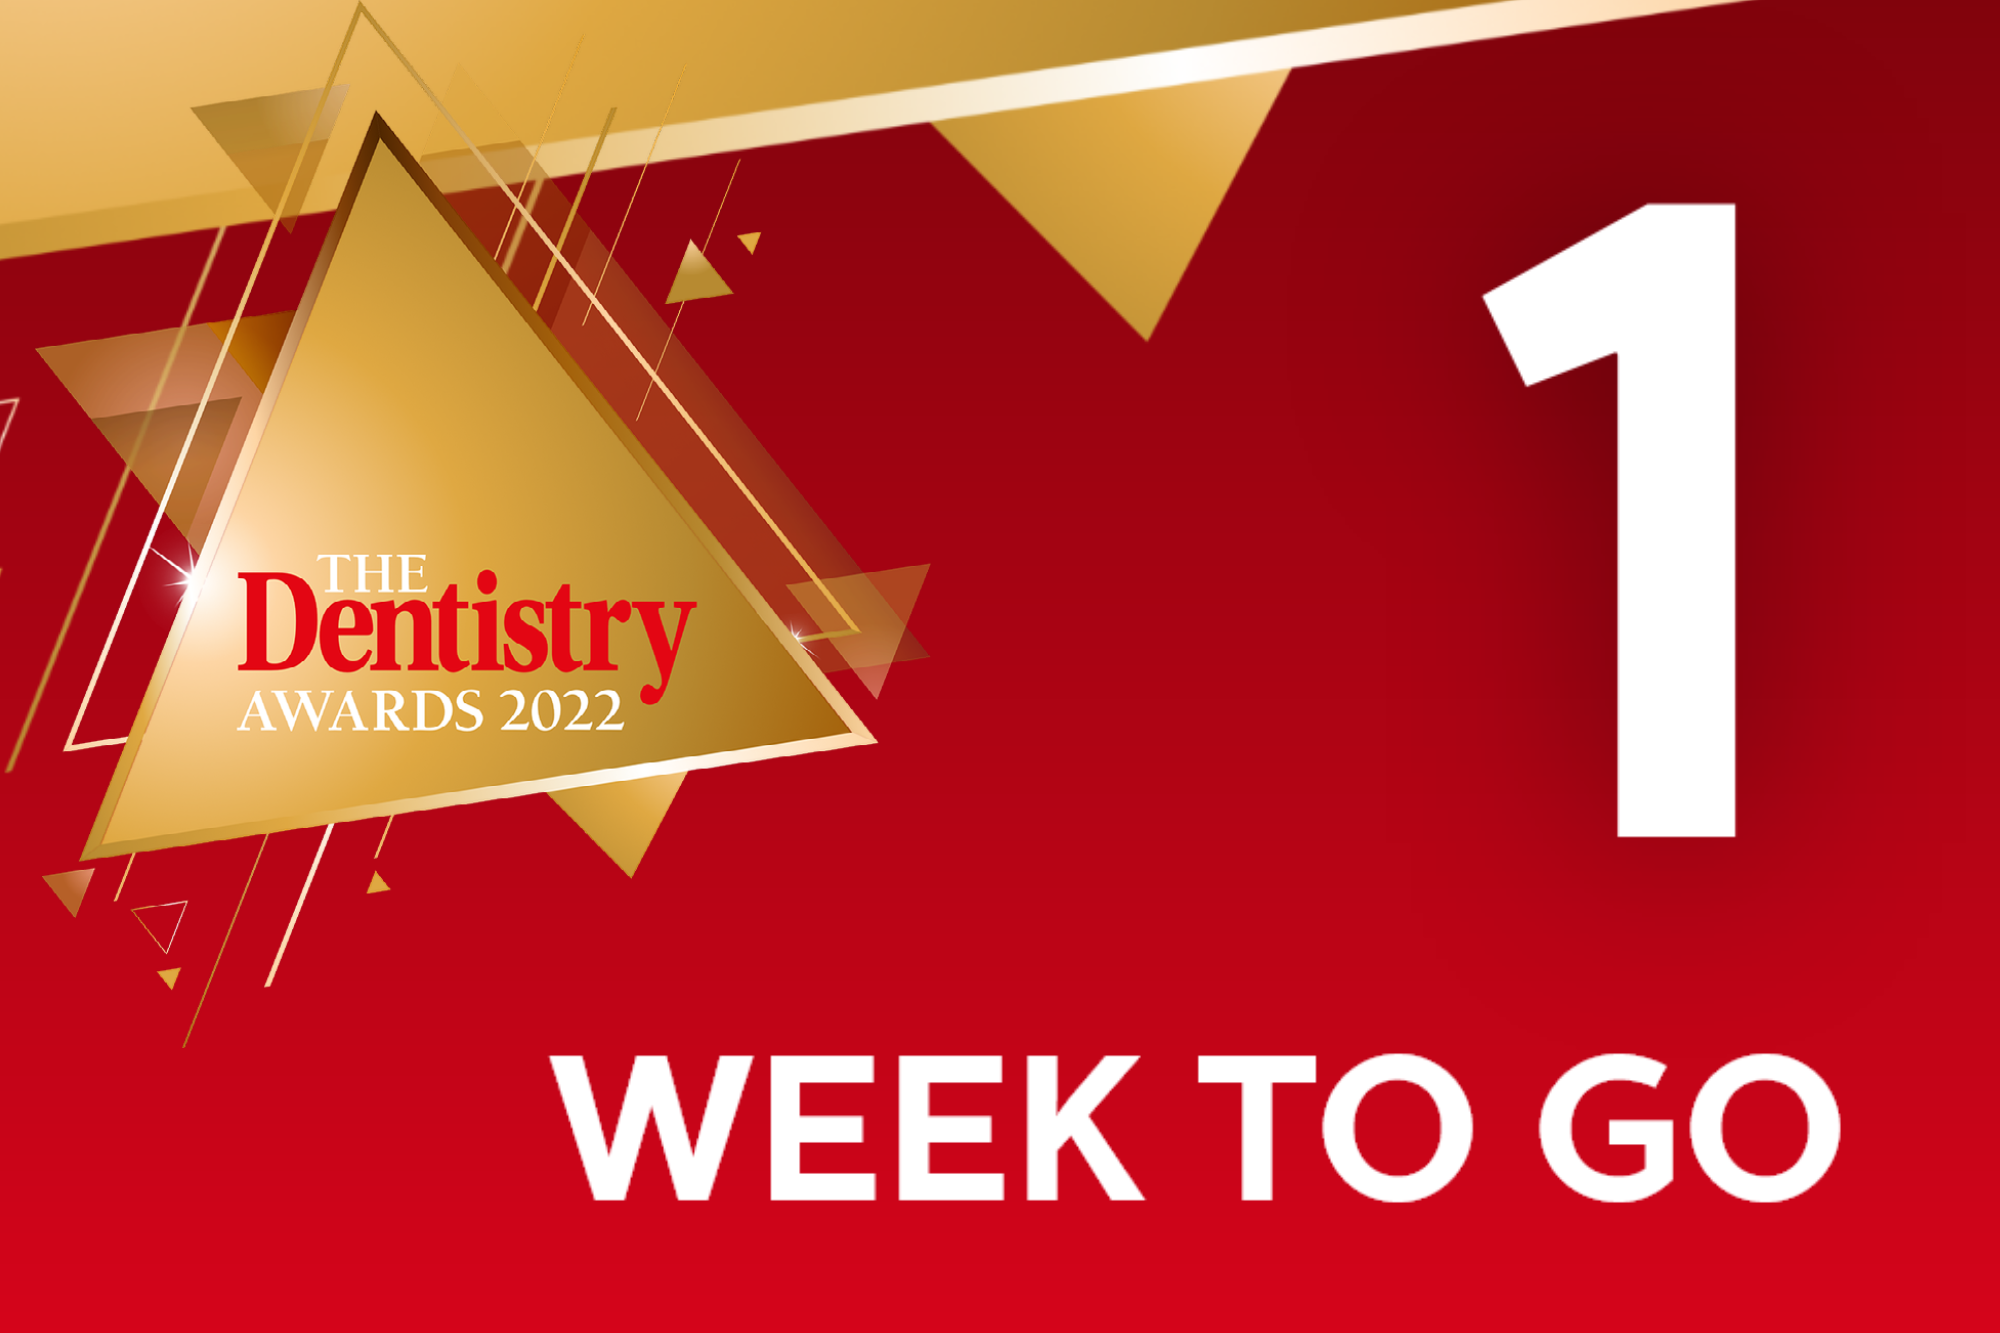 There's only one week to go until the entry deadline for the Dentistry Awards. Don't miss out – get your entries in now!